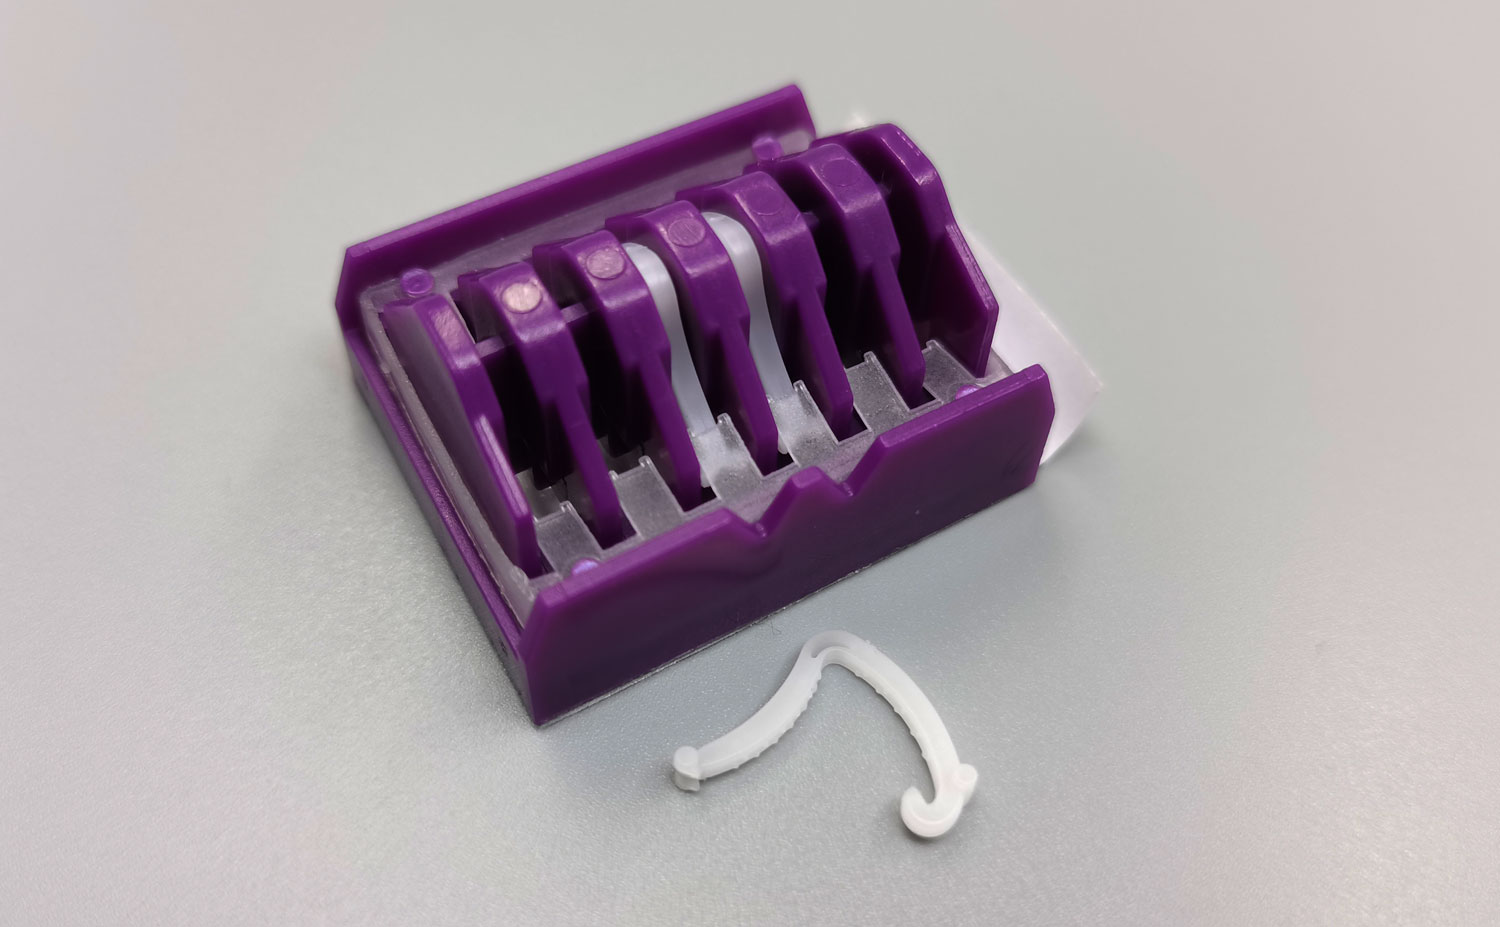 Instructions for Disposable Tissue Closure Clip